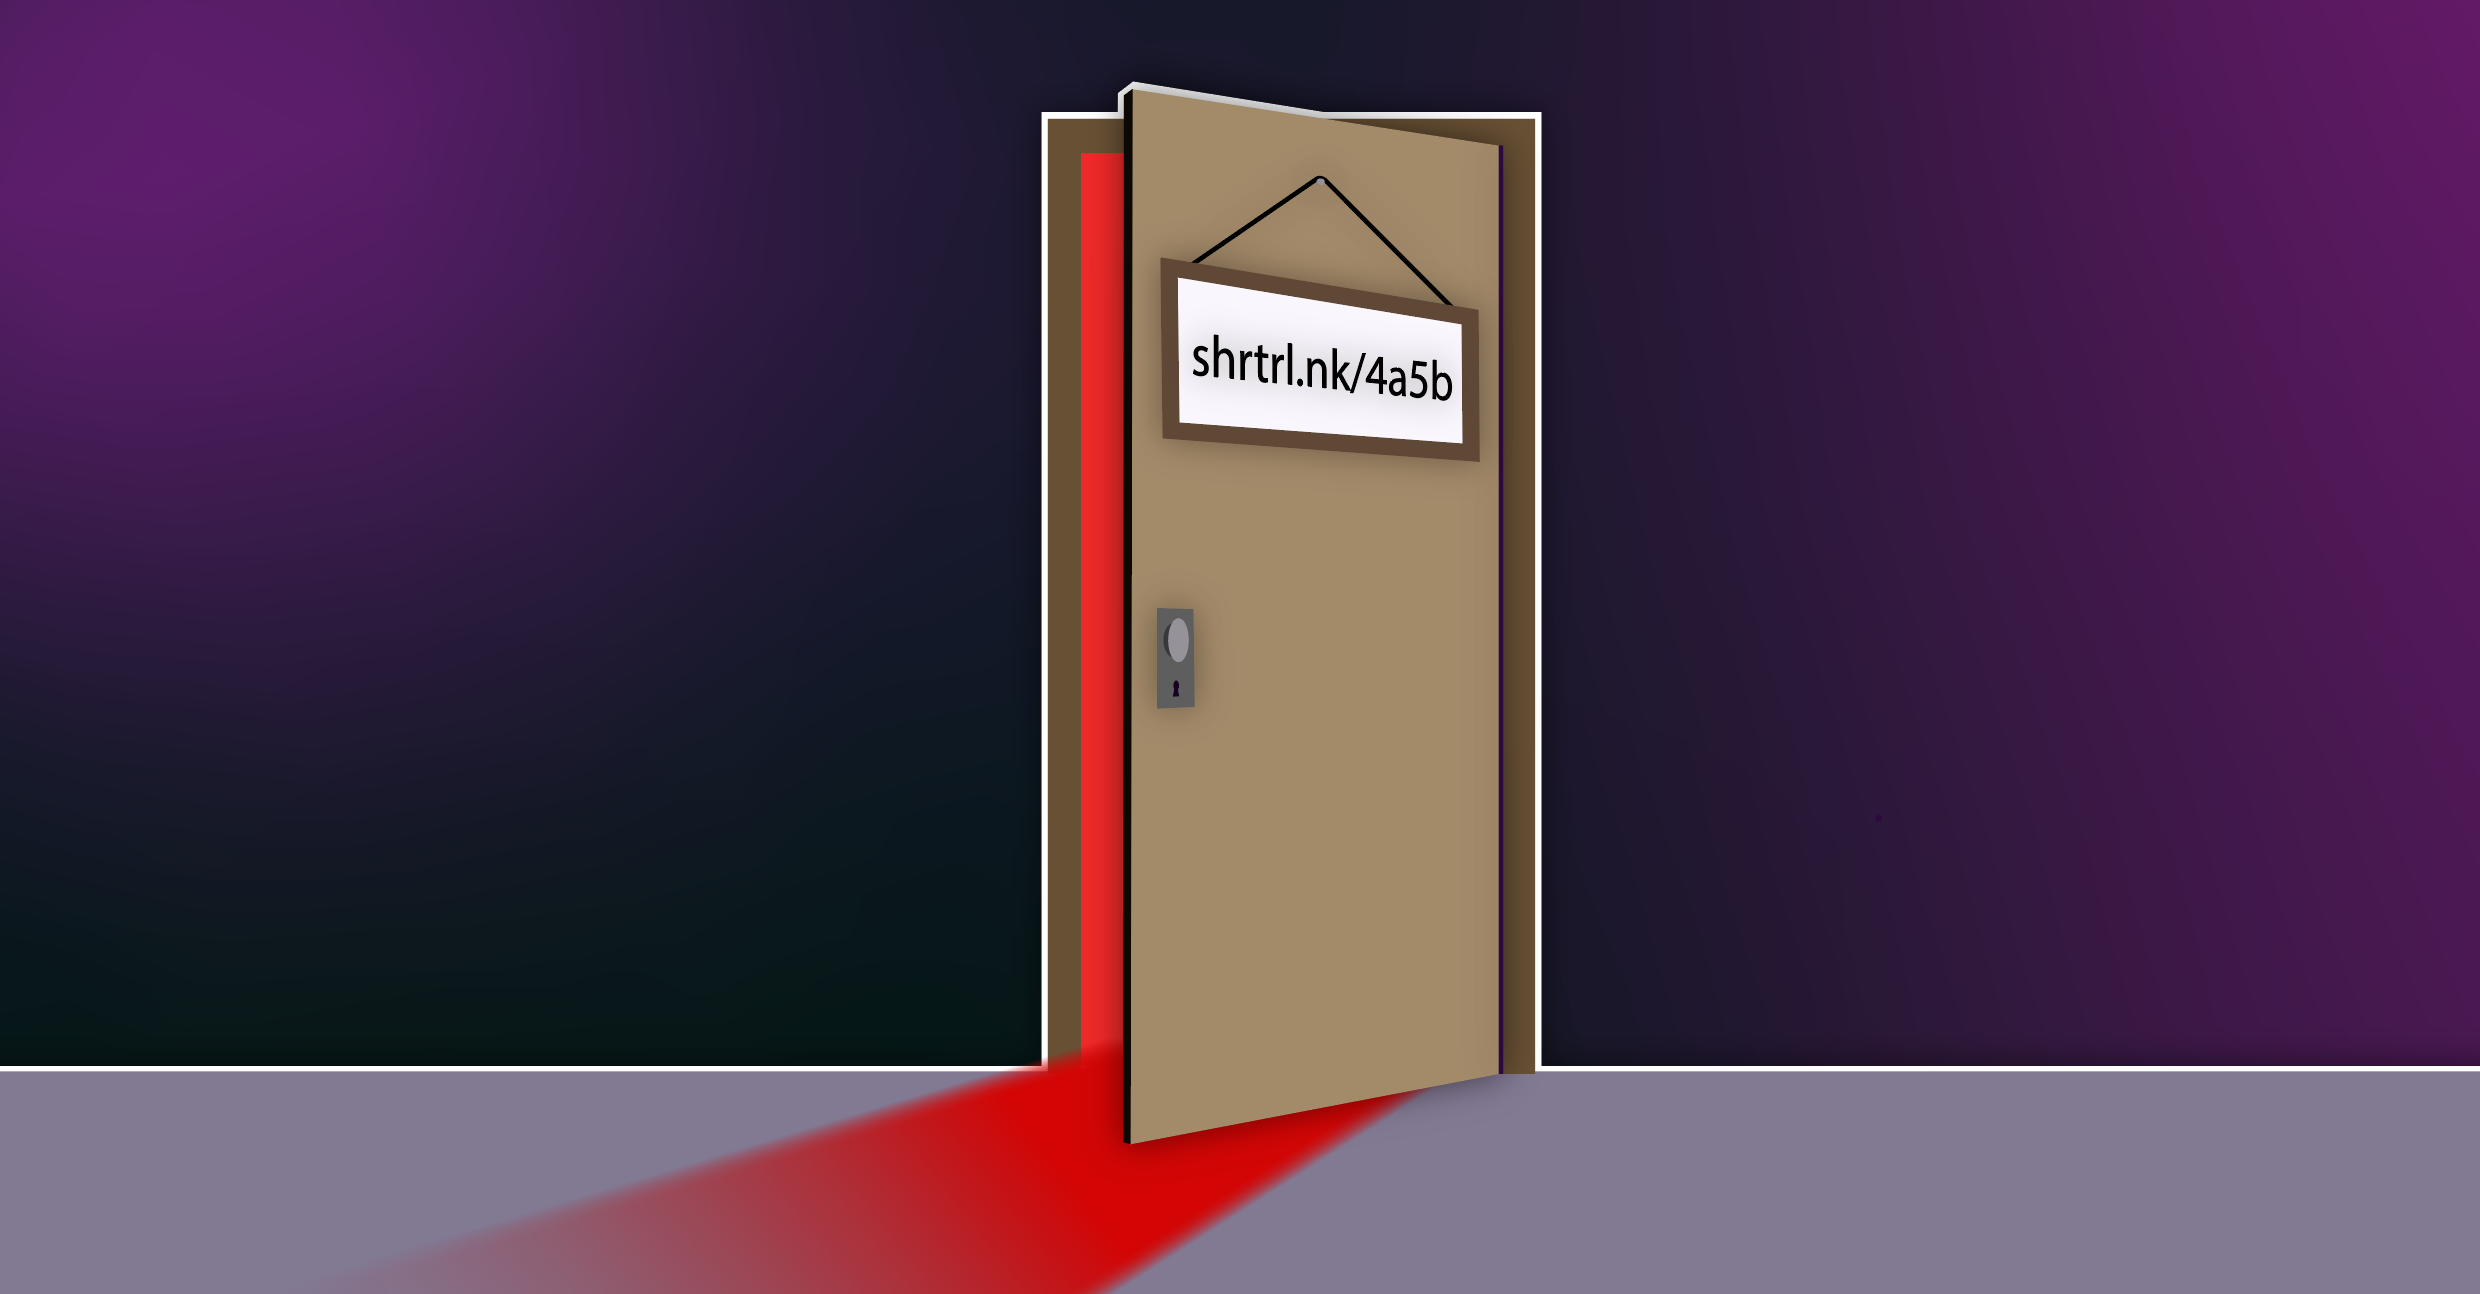 An illustration of a door with a shortened link on it leading to a red lit room.